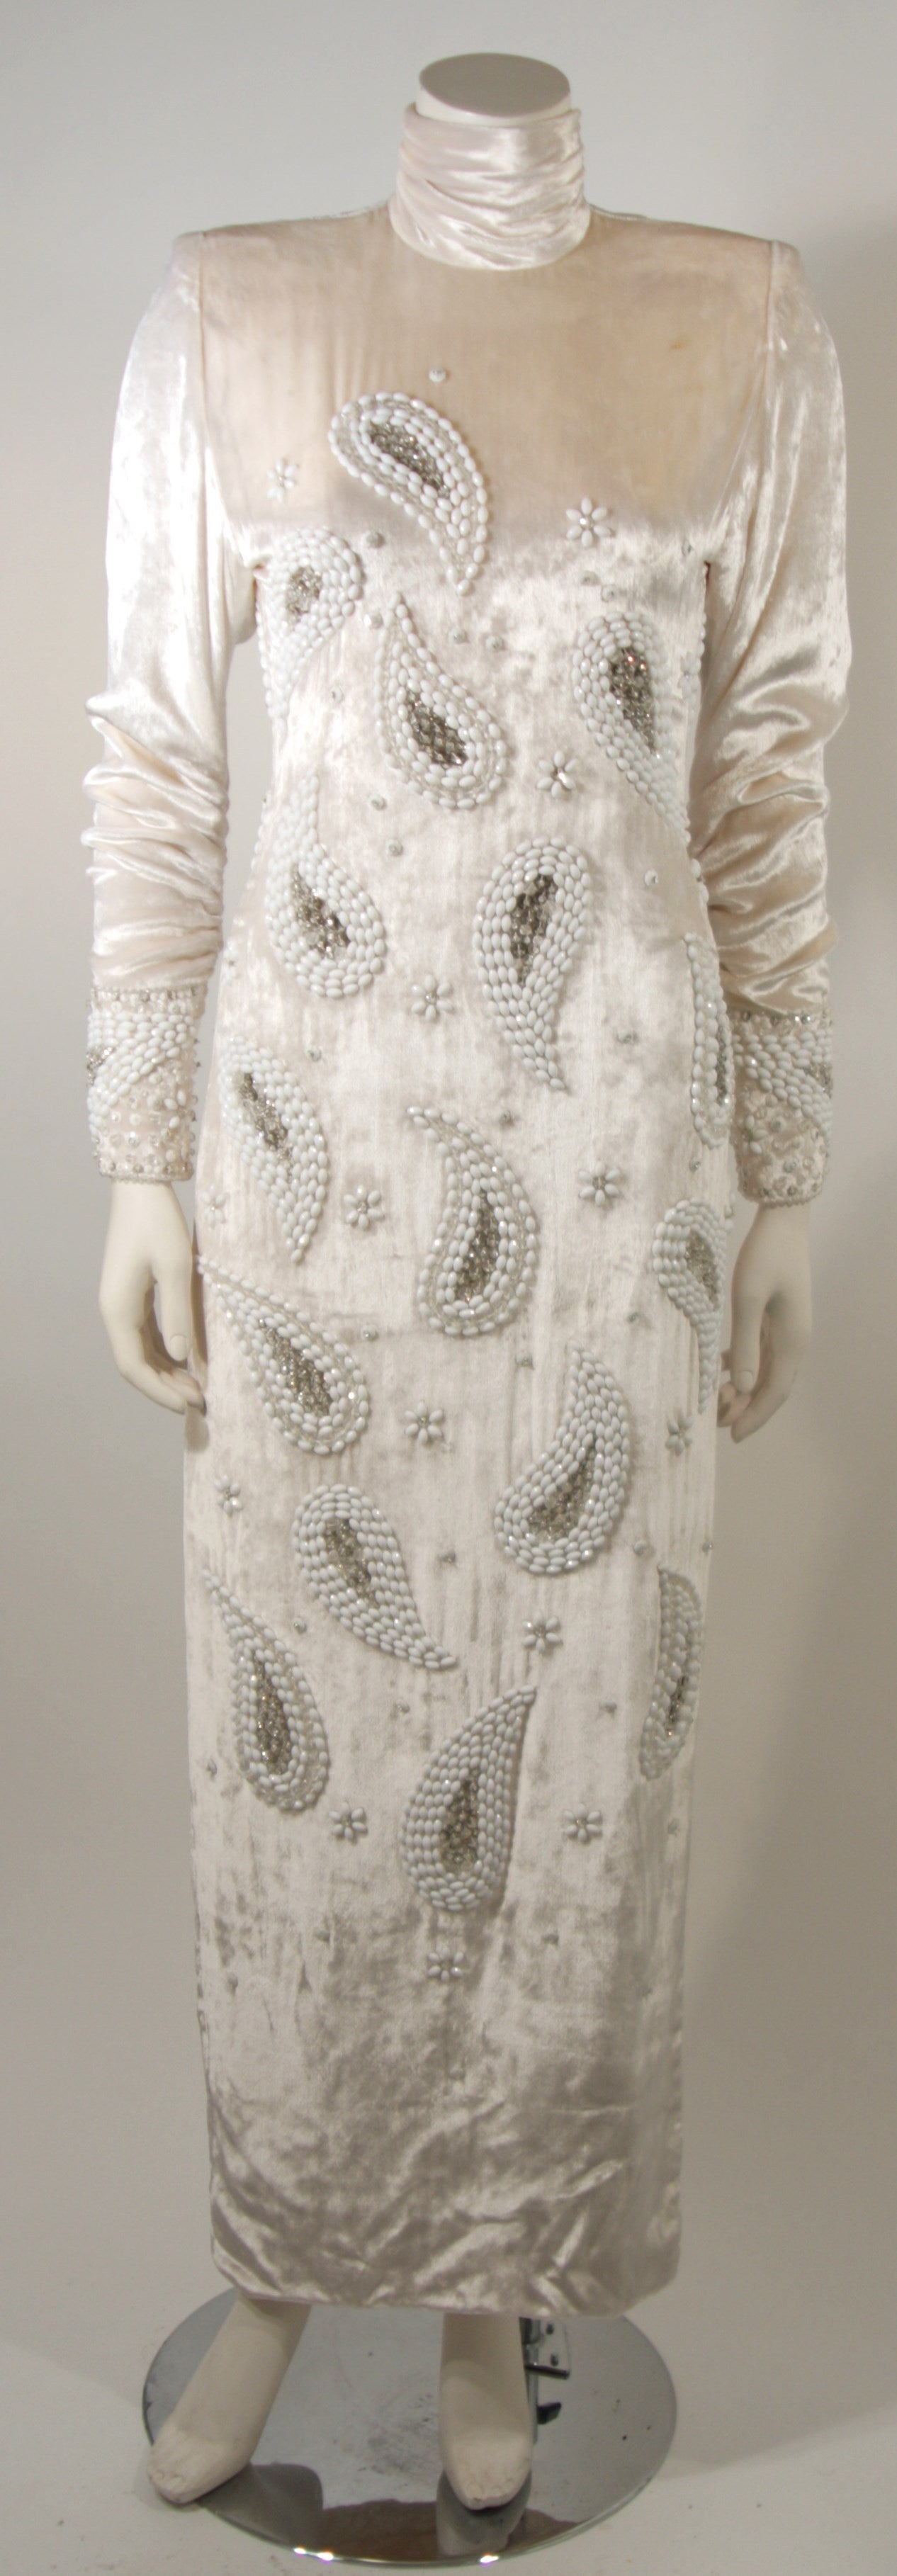 This Galanos gown is available for viewing at our Beverly Hills Boutique. The dress is composed of an off white crushed velvet and features ornate embellishments. Beautiful ruching at the neck and sleeves. There is a center back zipper and zippers